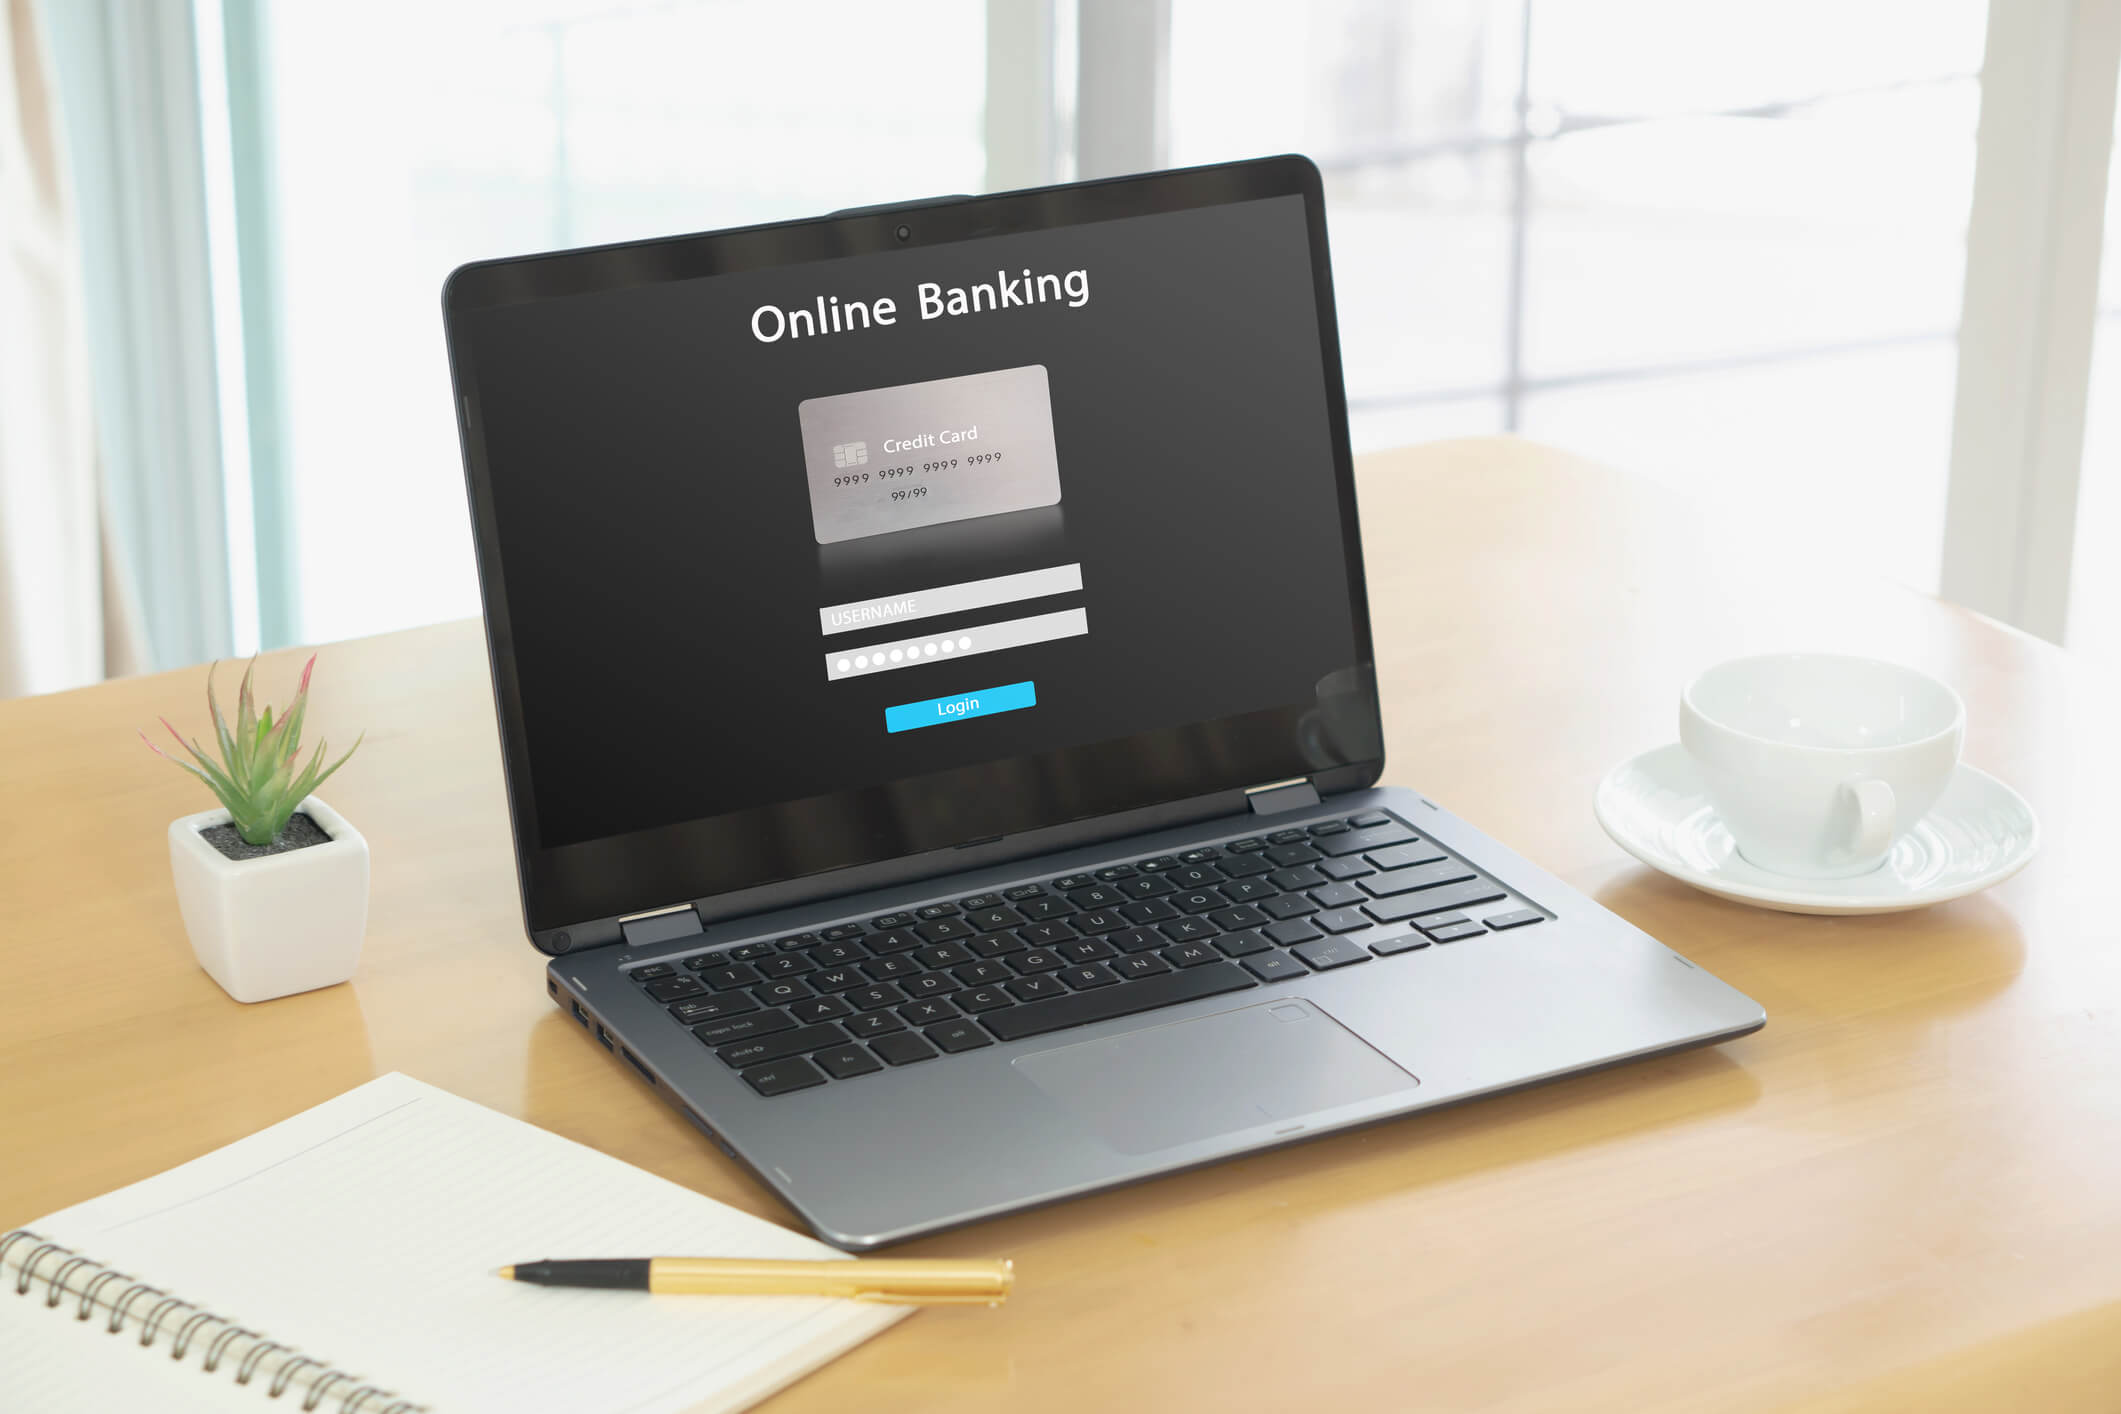 Banking Online while Blind: 3 Best Practices for Web Accessibility